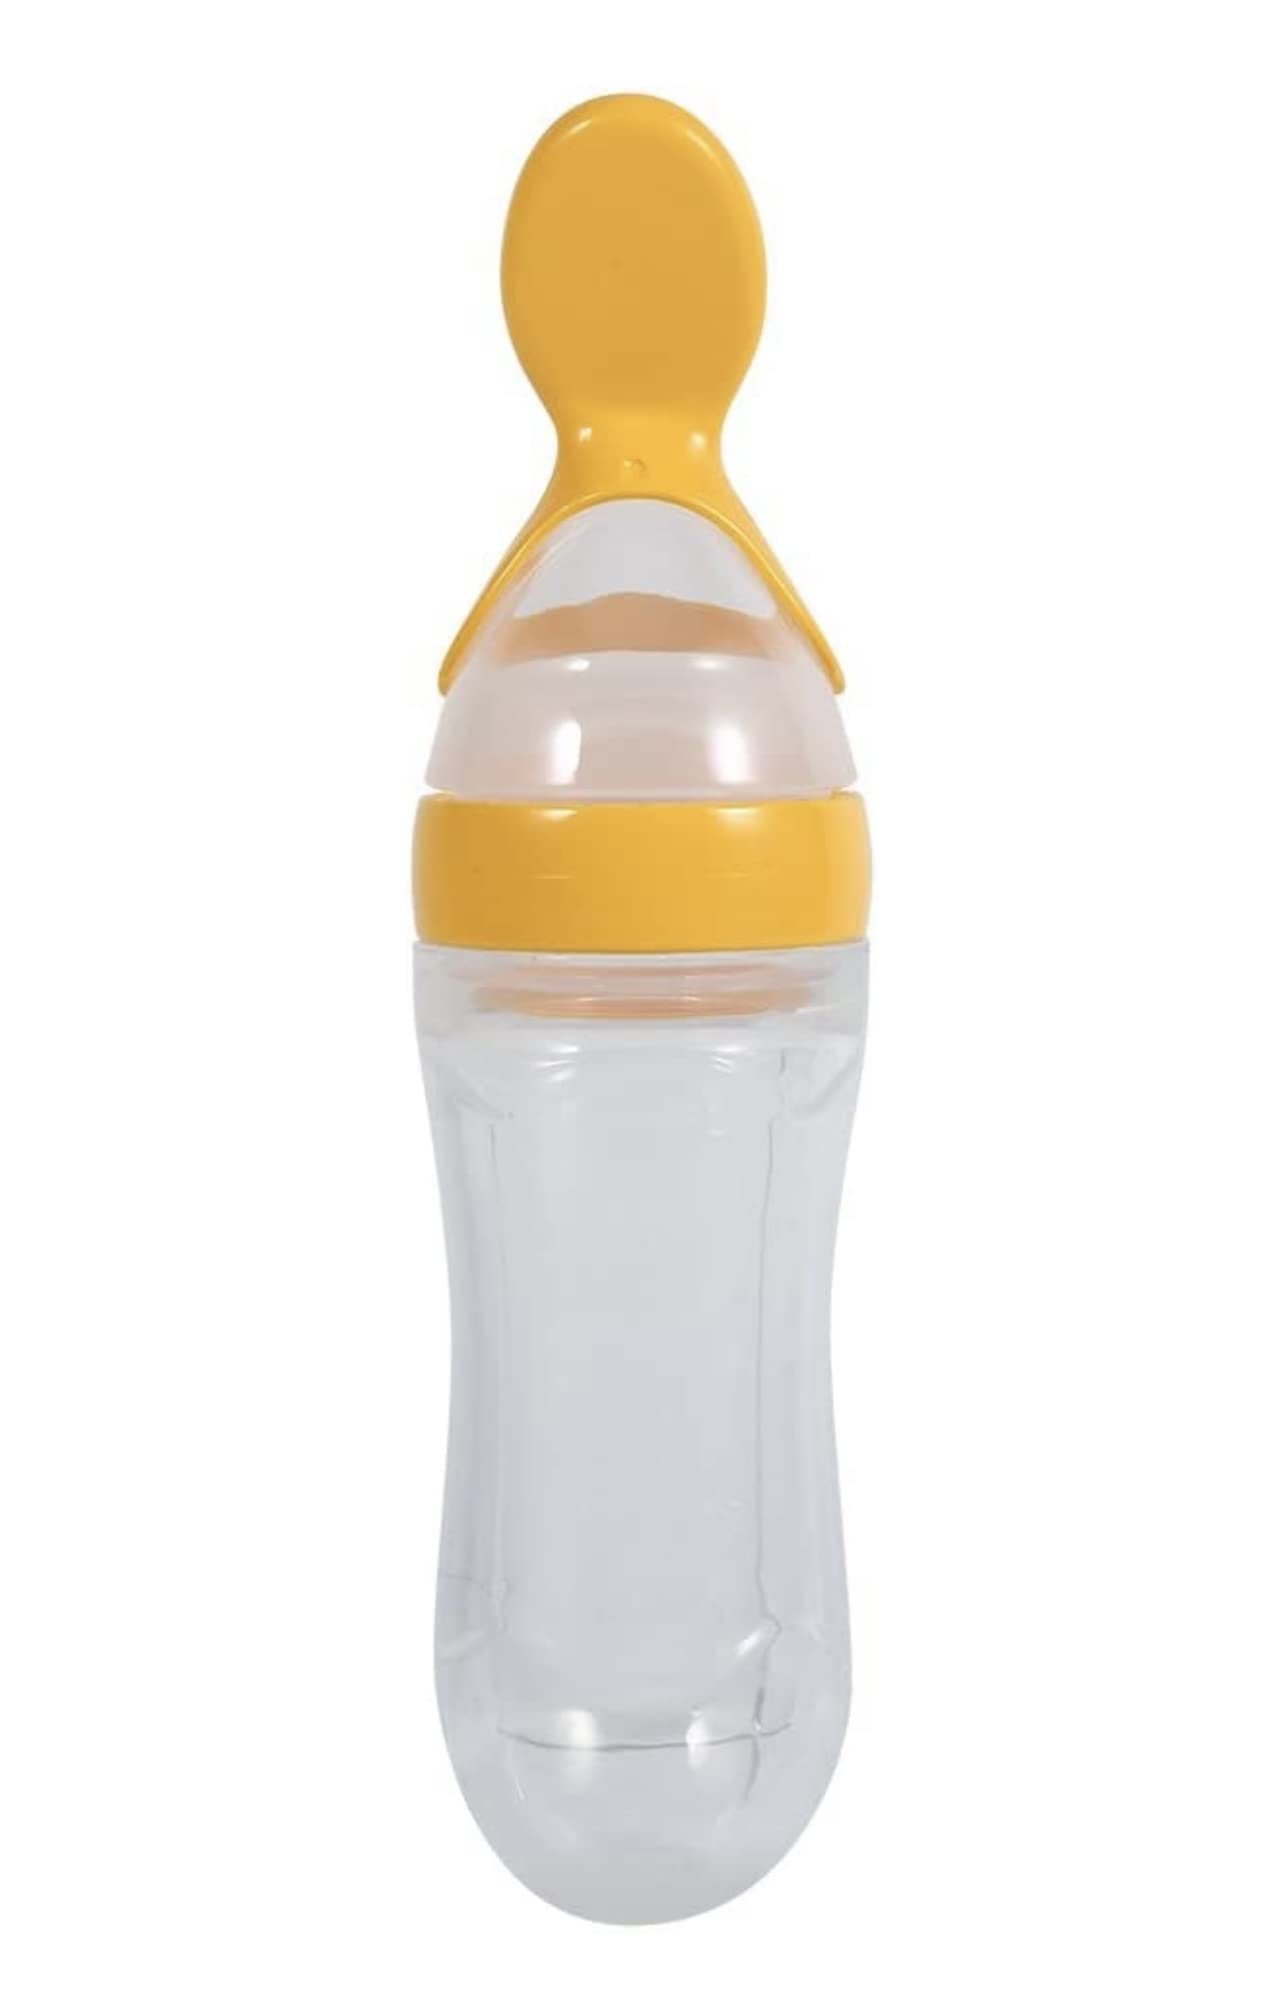 Silicone Toddler Feeding Bottle  Silicone Food Dispensing Spoon